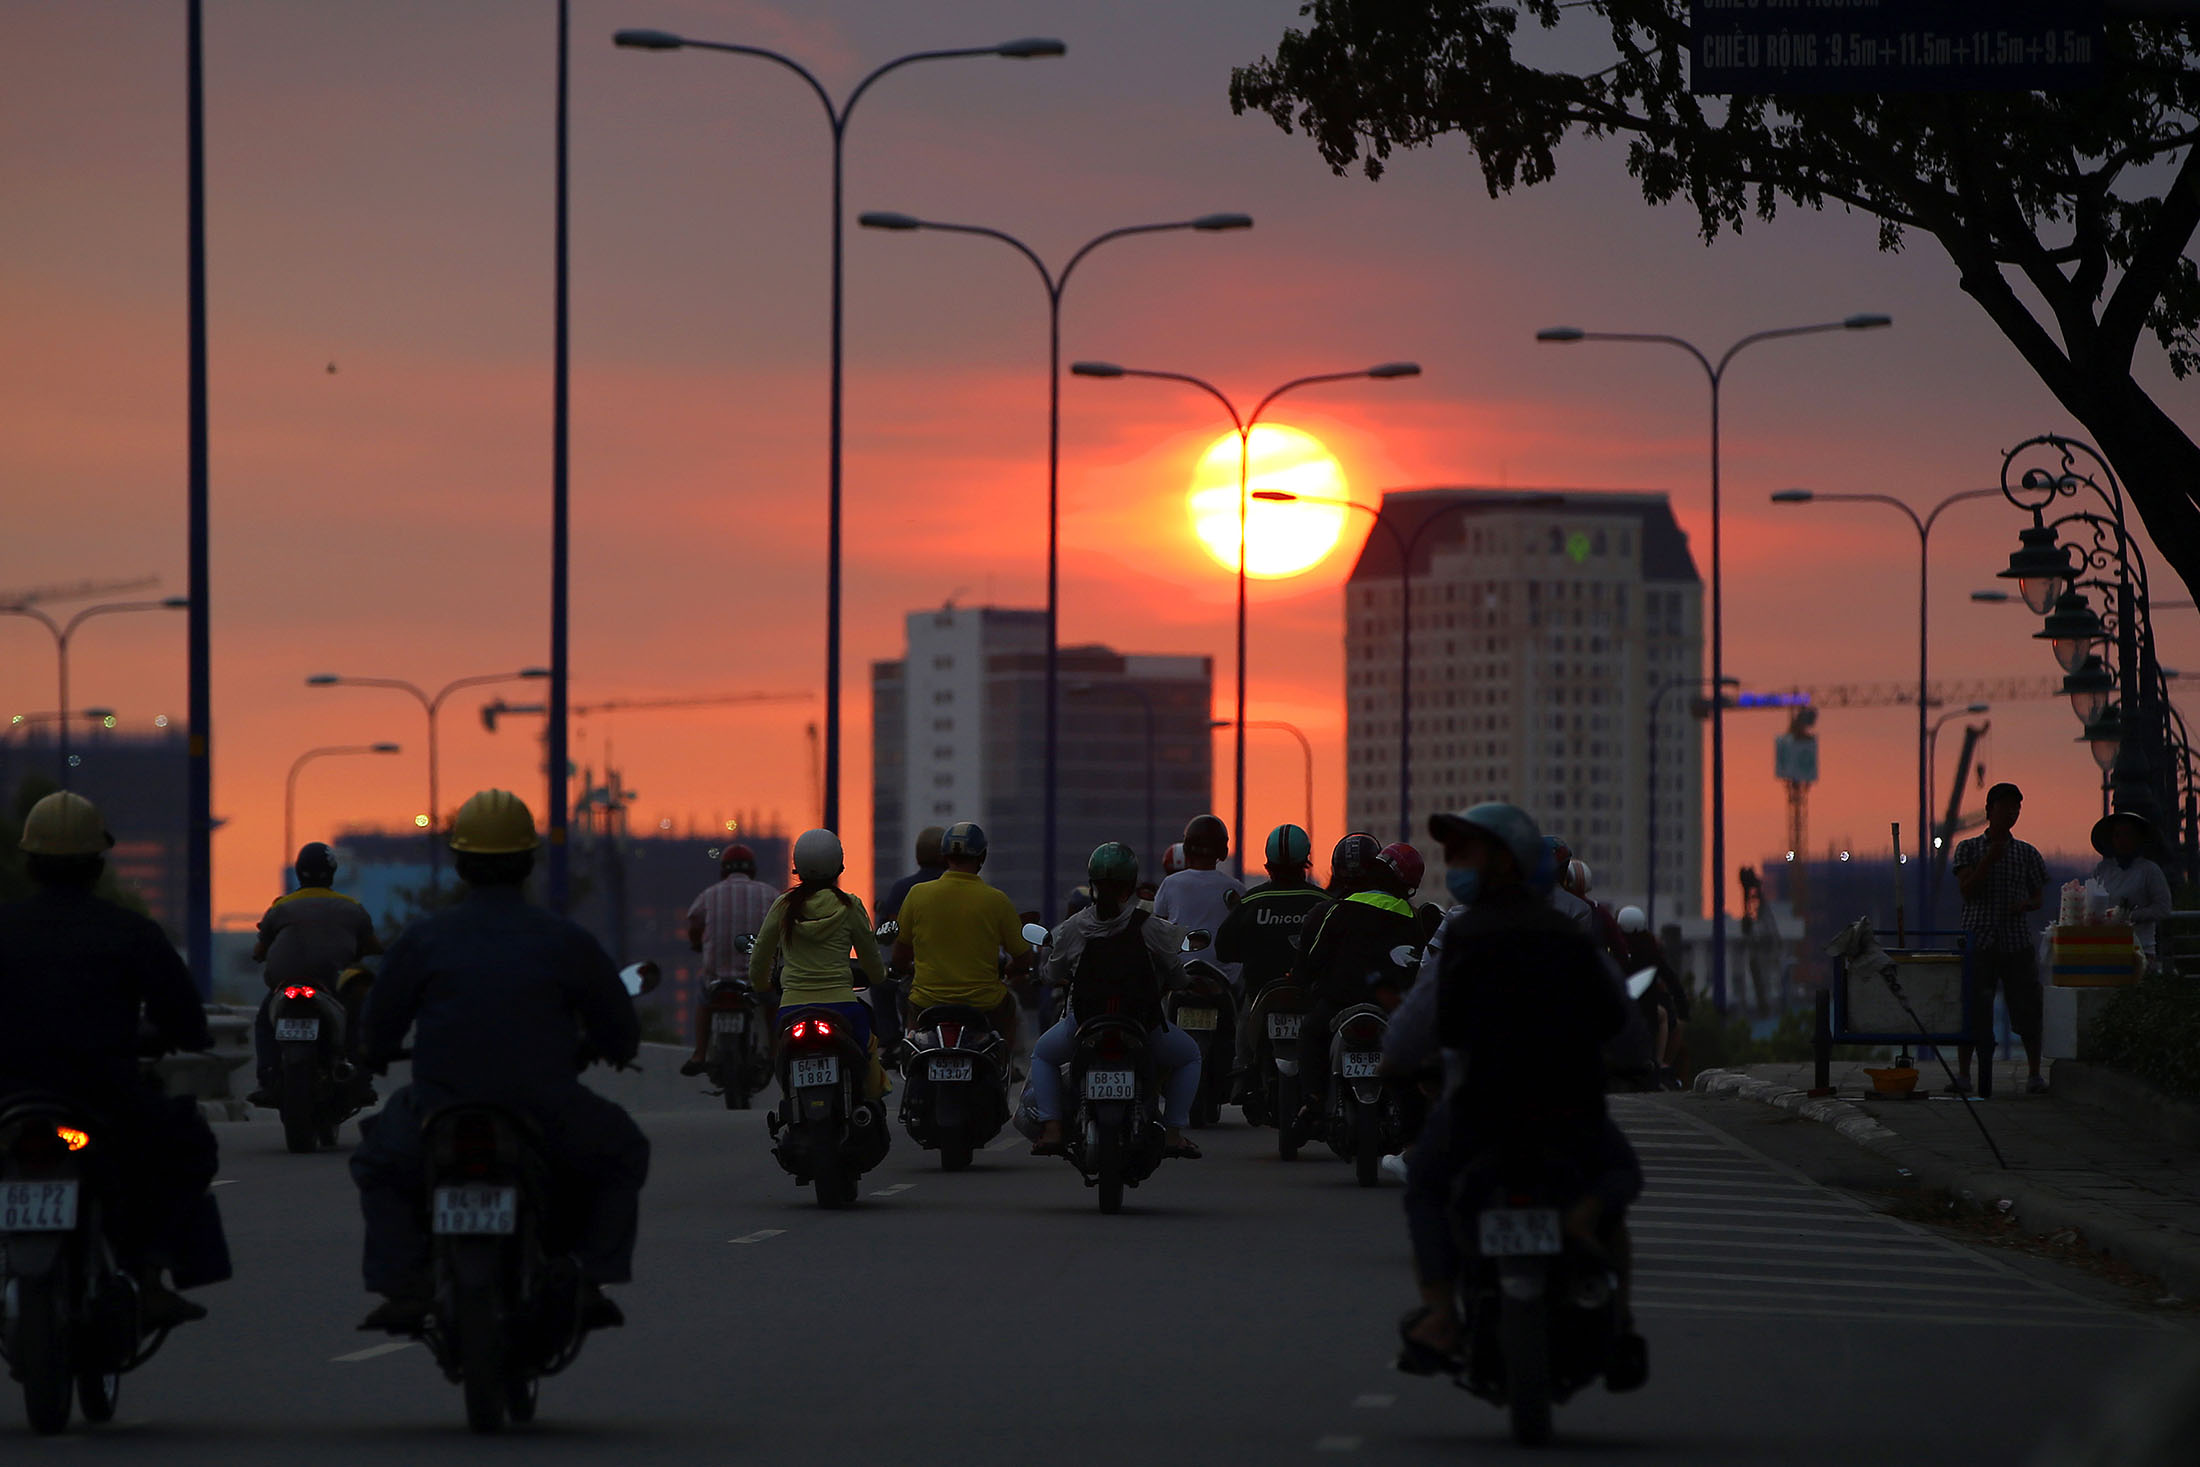 Motorcyclists travel along a road during sunset in Ho Chi Minh City.